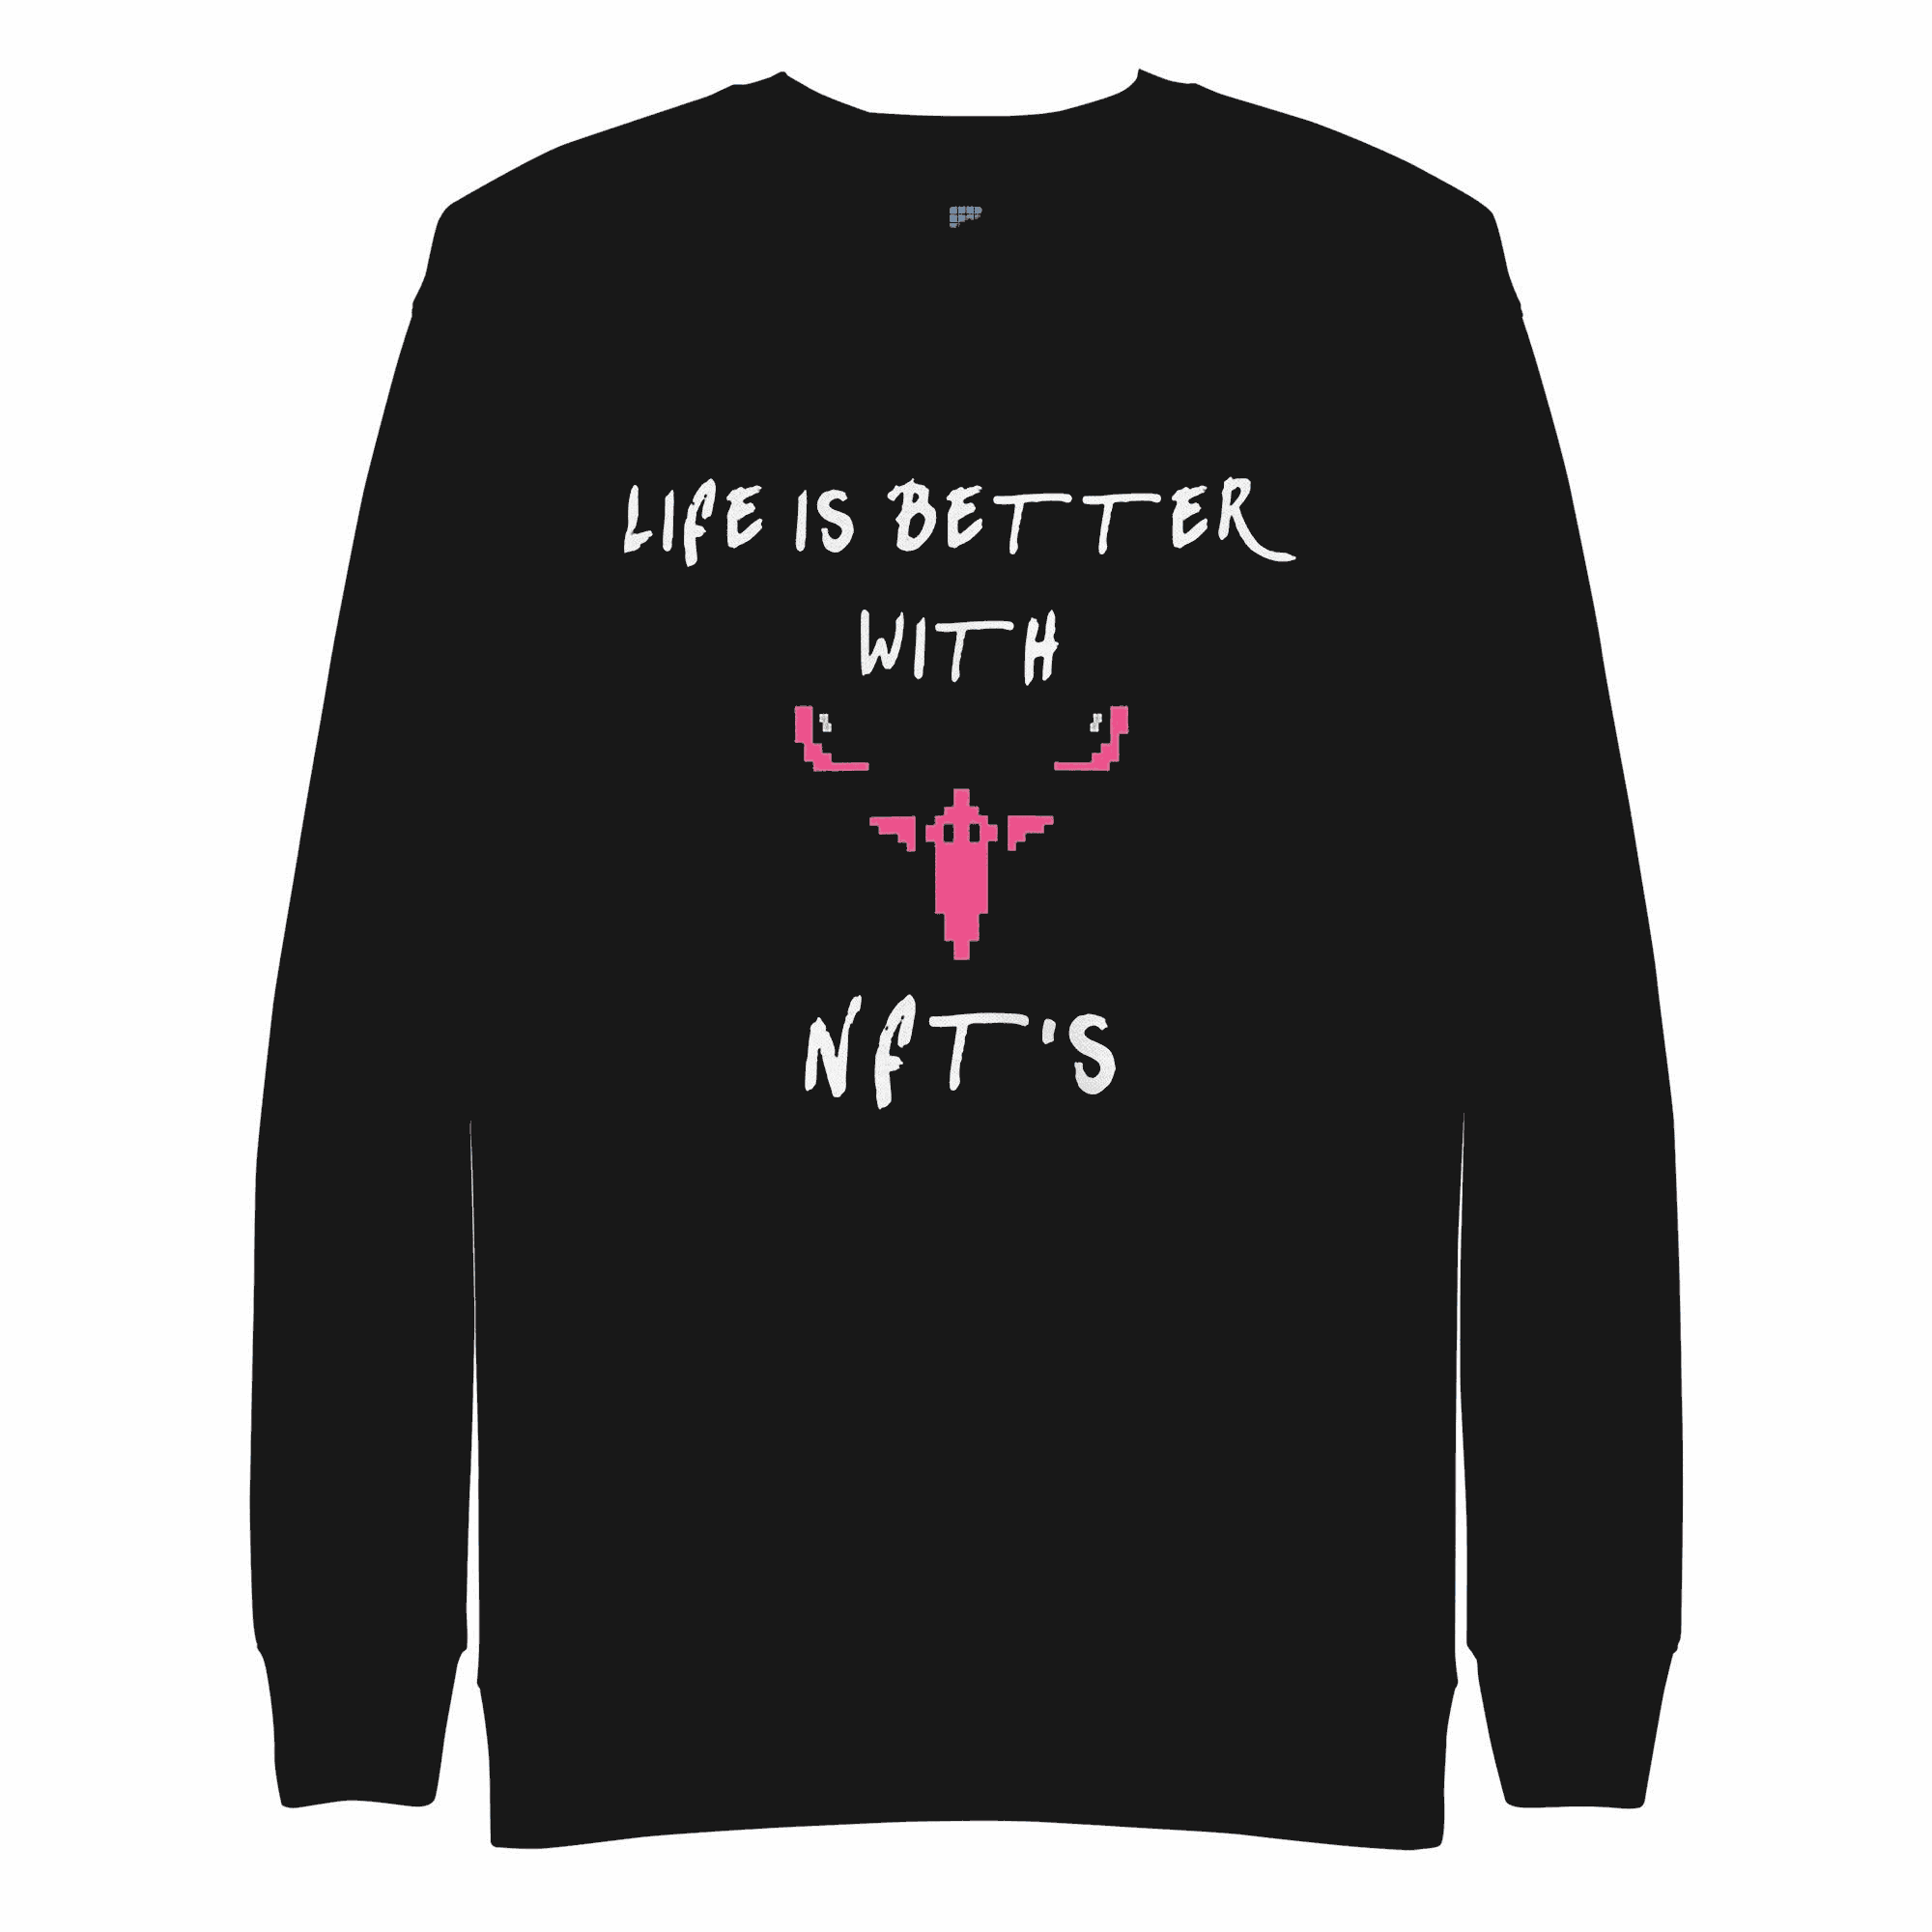 Better With NFT's Sweatshirt - InvestmenTees